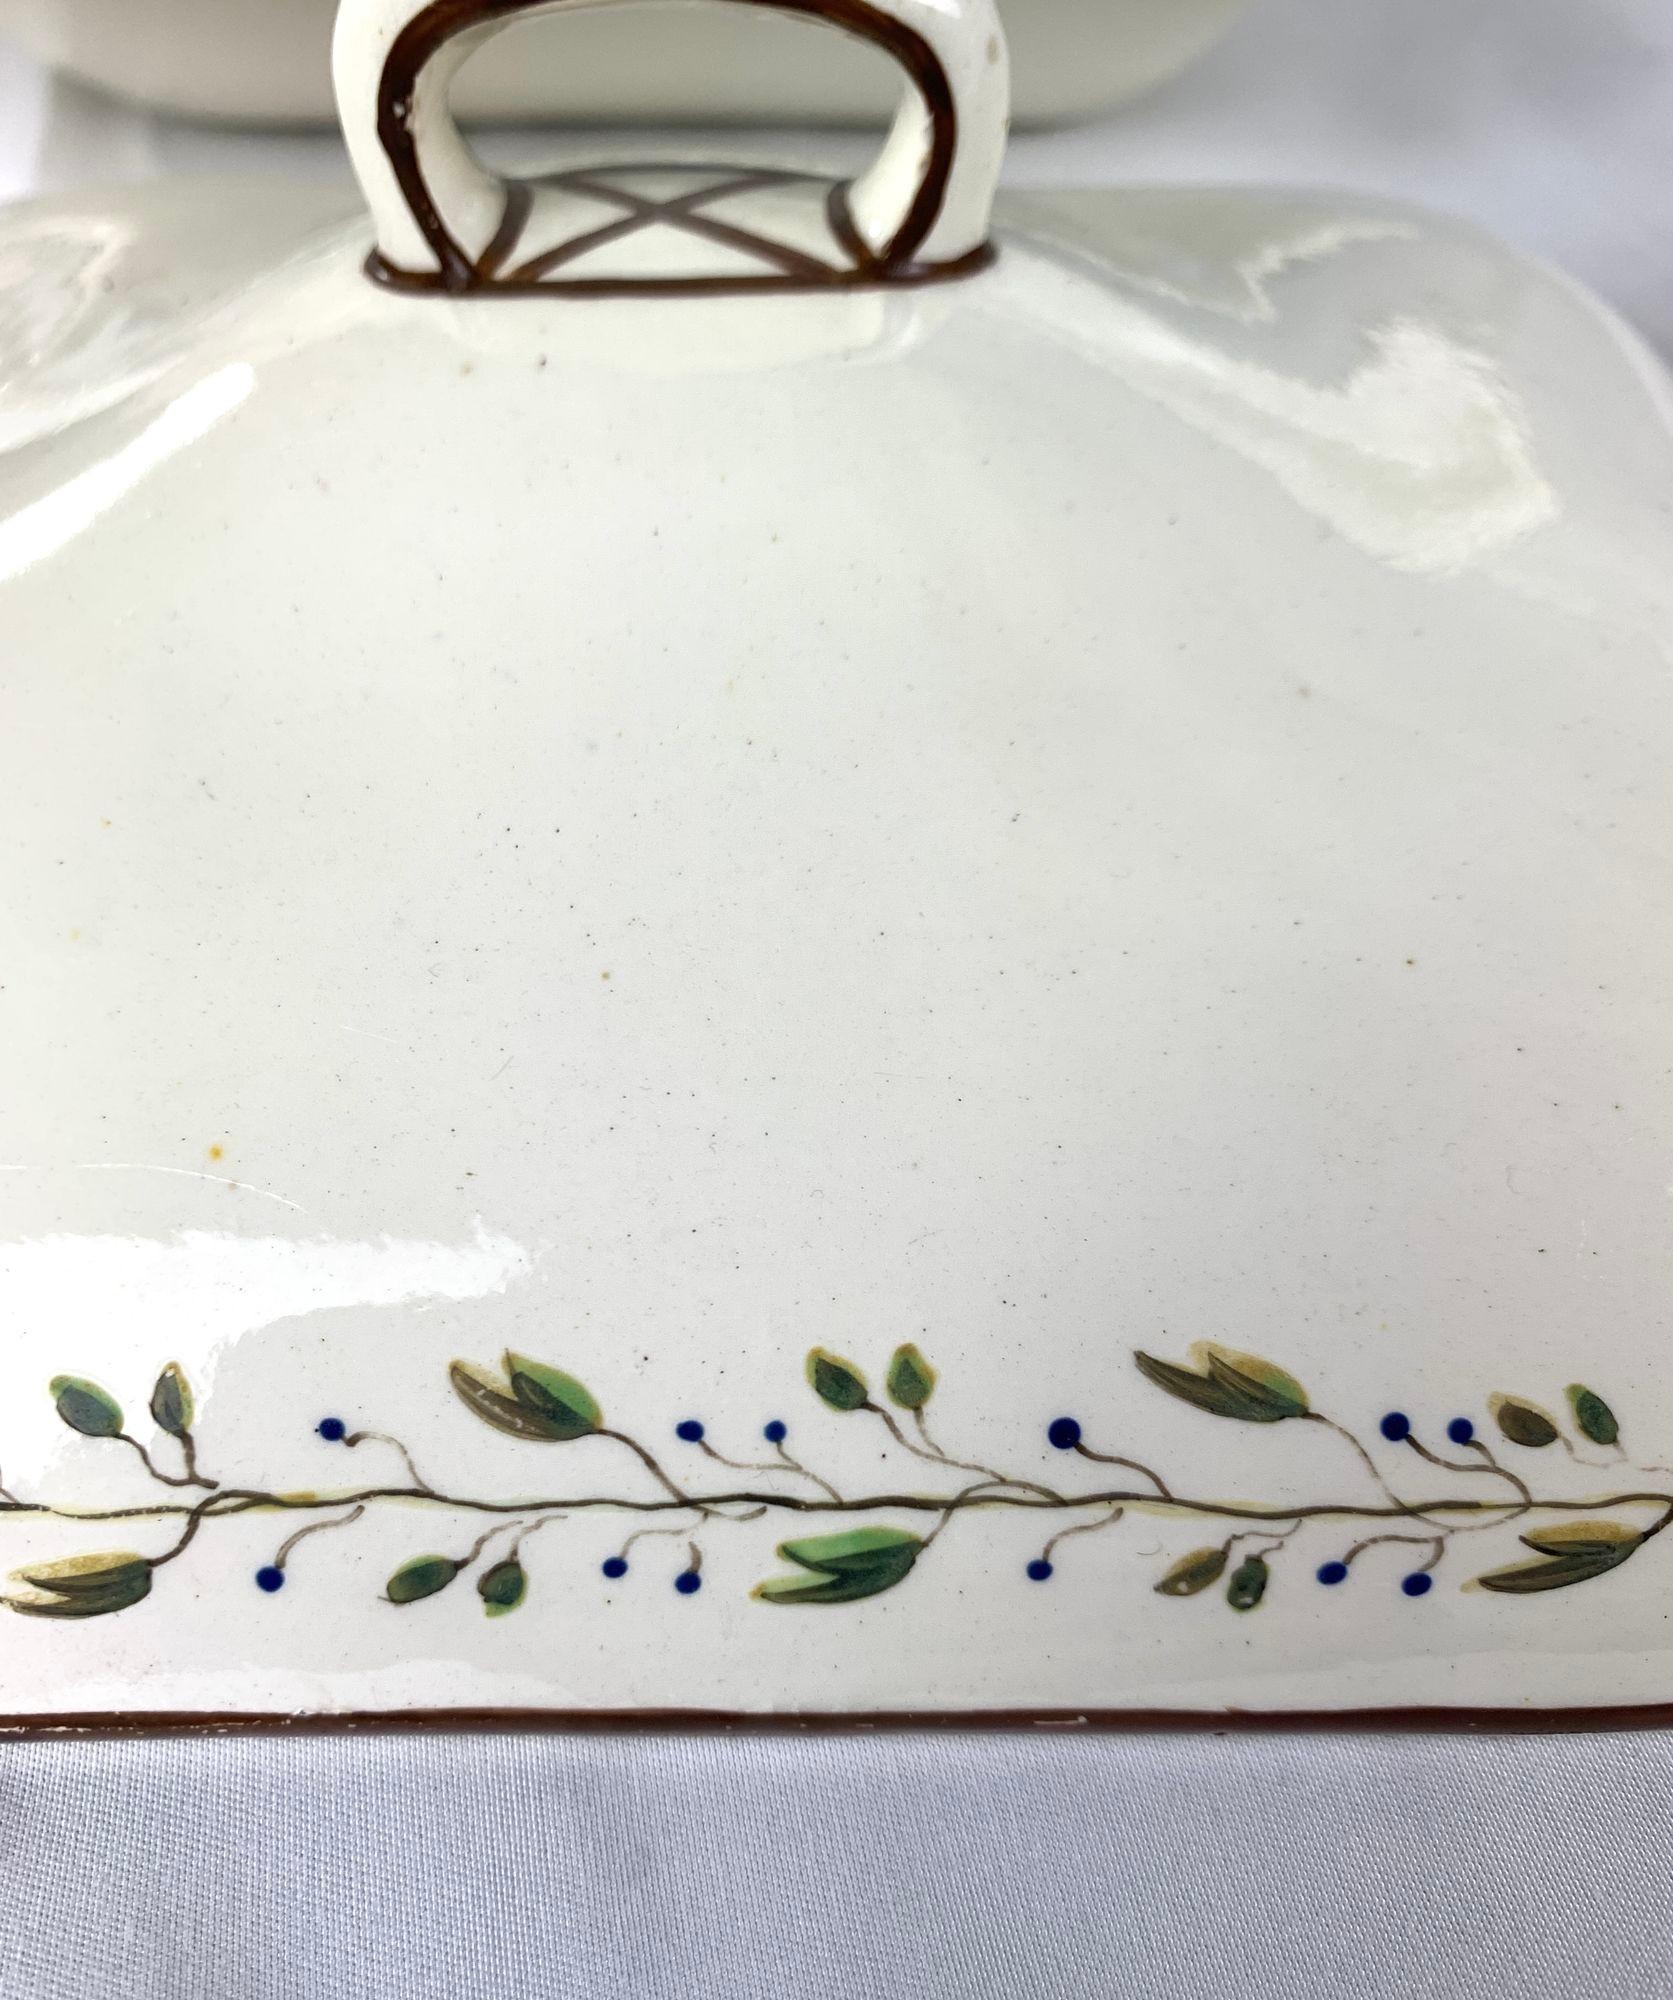 The set was hand painted at Wedgwood, in England, circa 1785.
The borders are decorated with a delicate band of green leaves and berries on the vine, and the edges are painted brown.
The pattern is typical of the patterns found in the Wedgwood